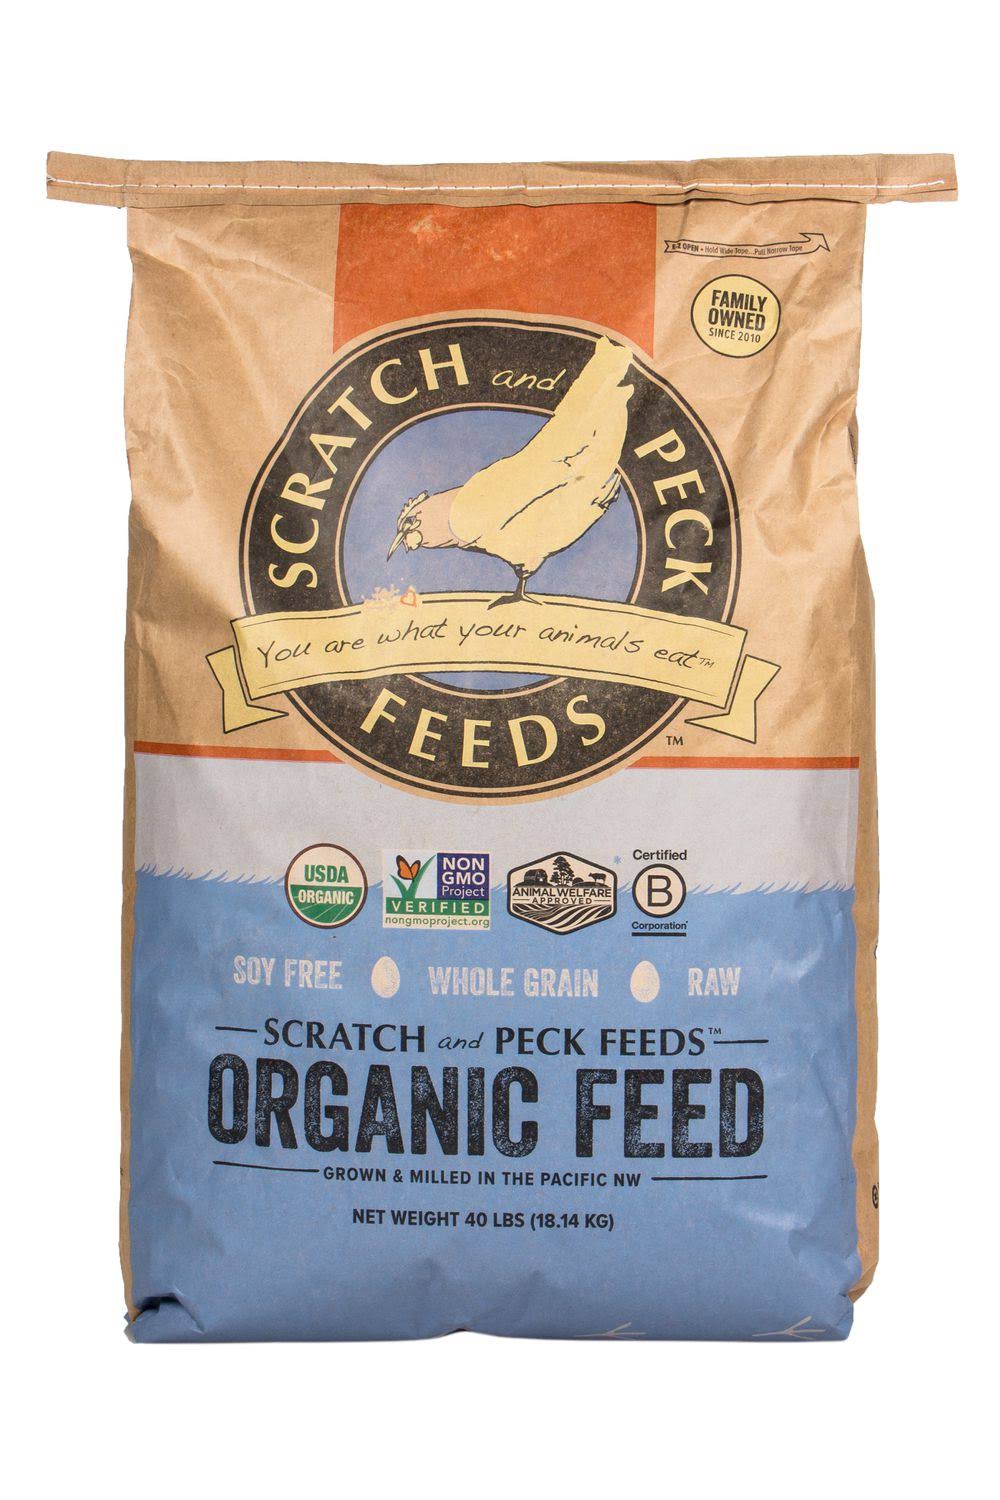 Scratch and Peck Feeds Naturally Free Organic Chick Starter Feed - 40 lb